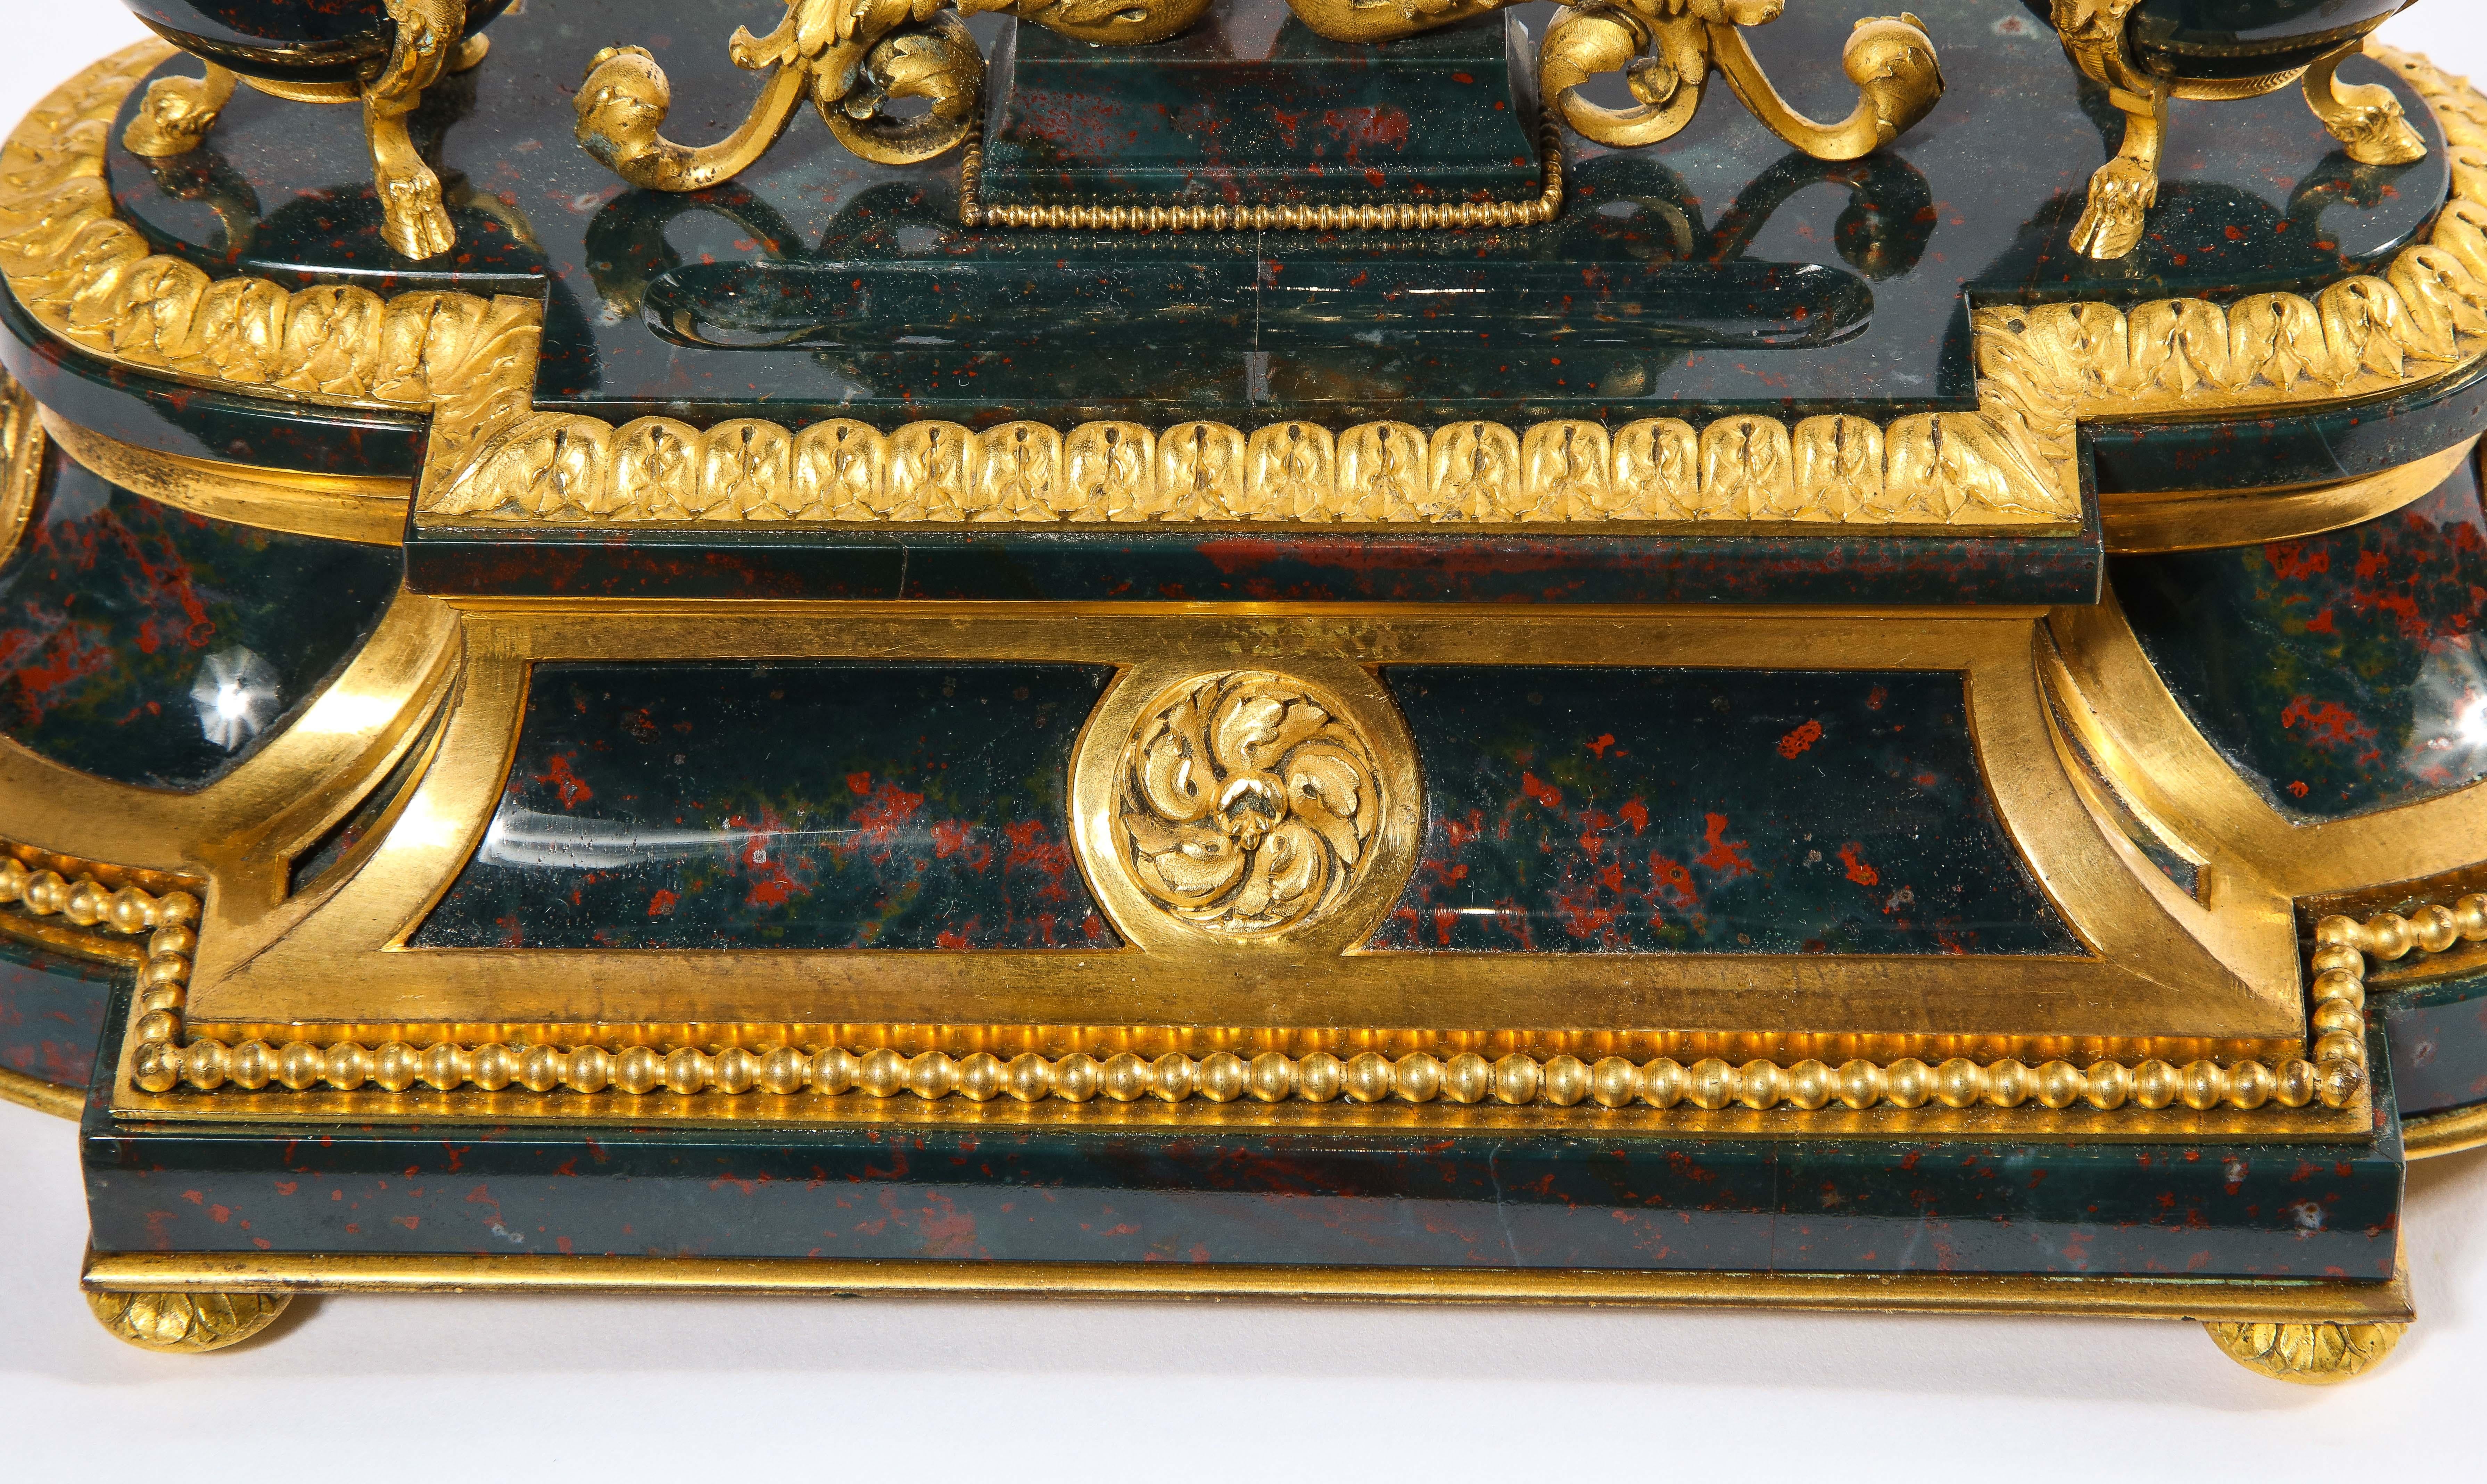 19th Century An Exquisite and Rare French Louis XVI Style Ormolu-Mounted Bloodstone Inkwell For Sale